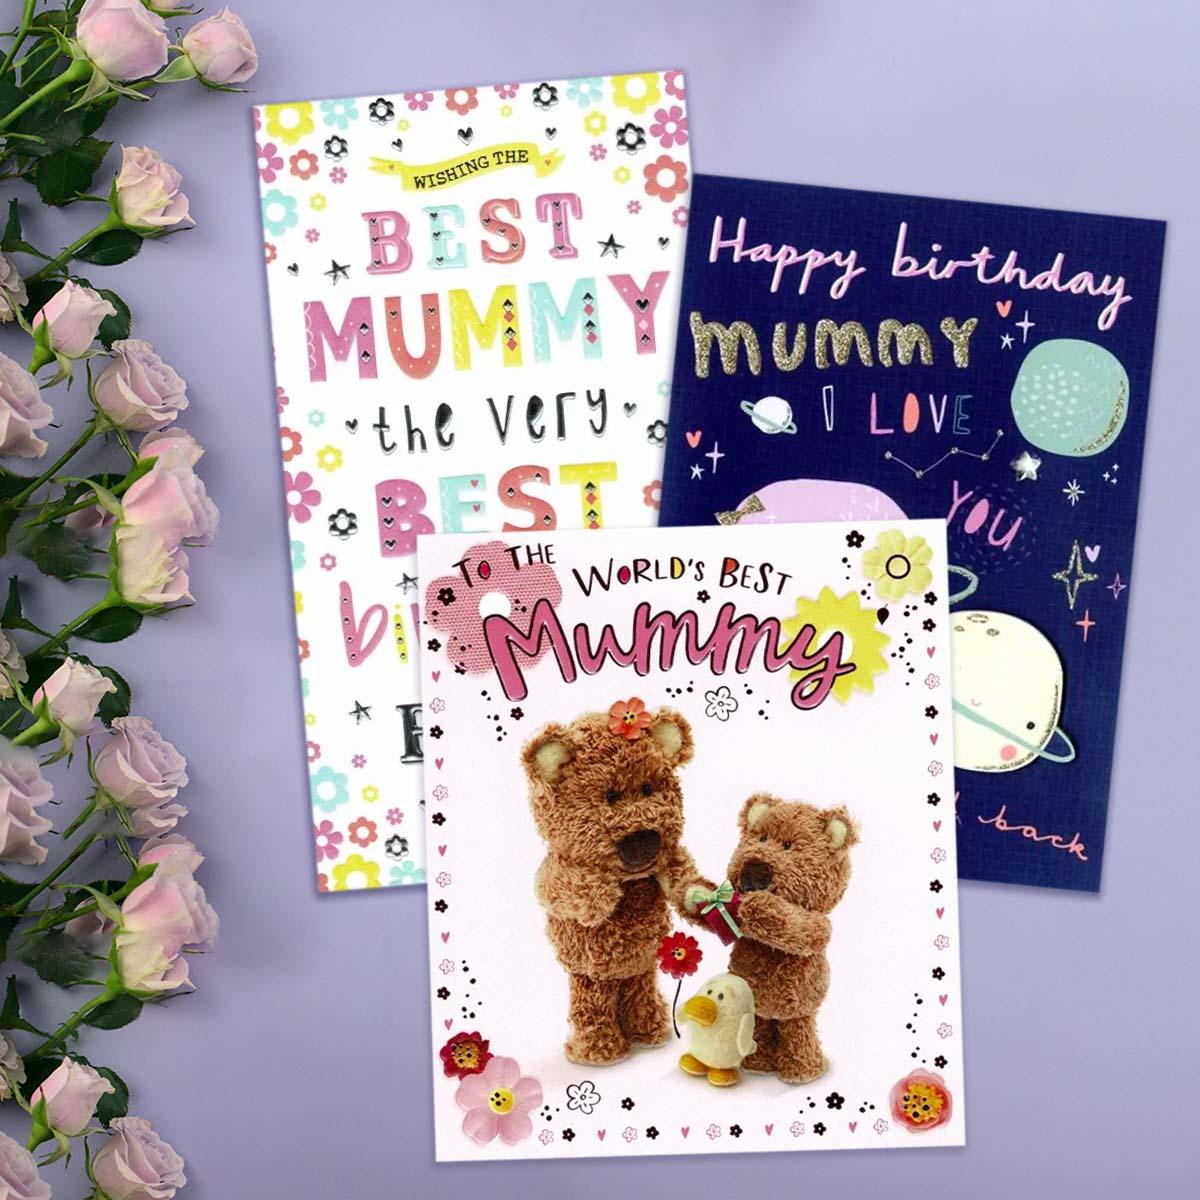 A Selection Of Cards To Show The Depth Of Range In Our Mummy Birthday Card Section